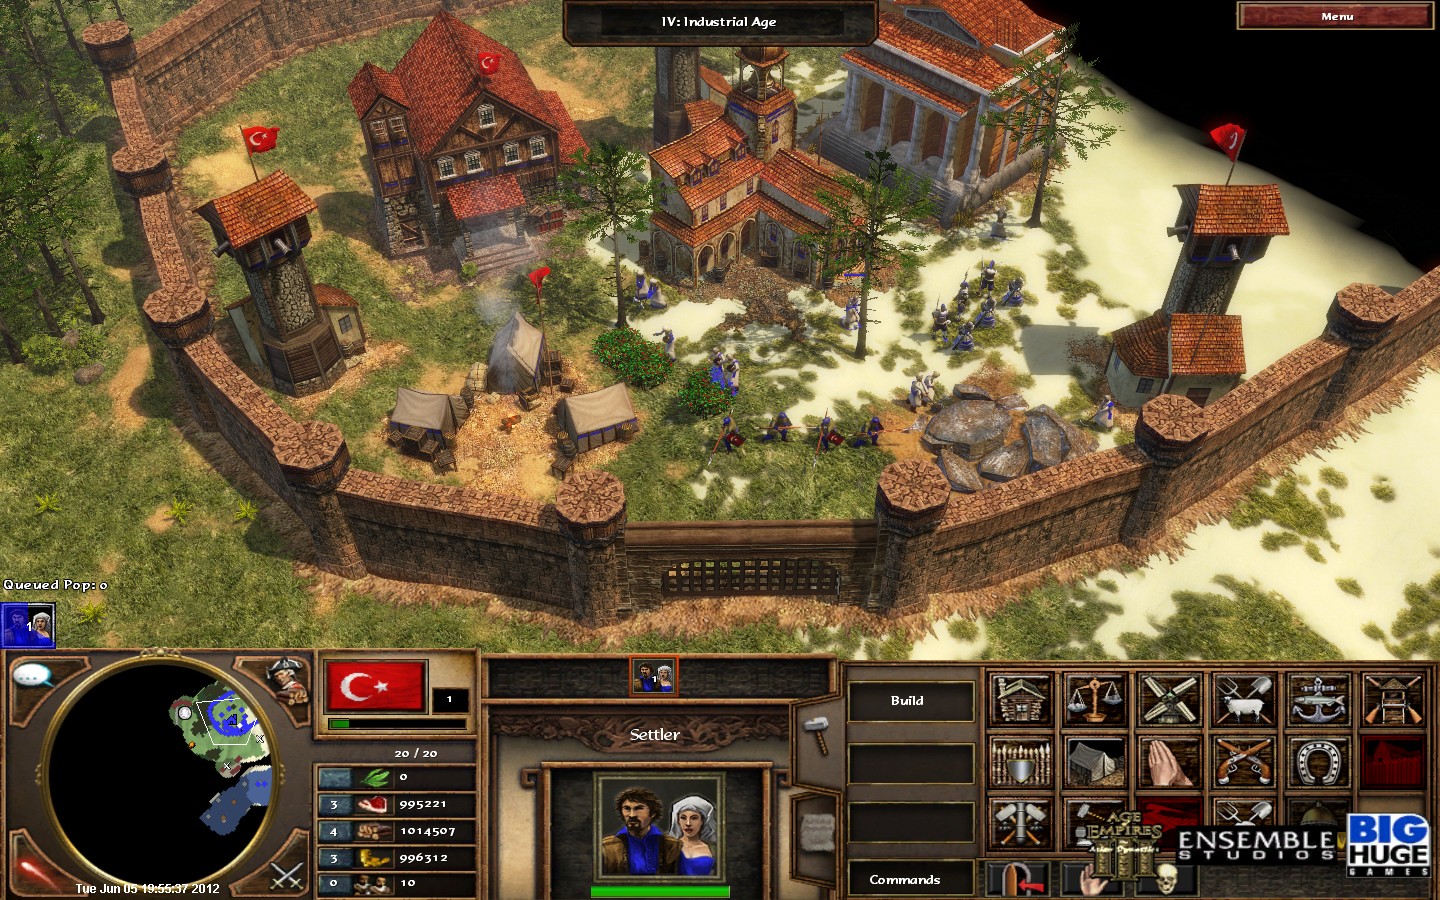 age of empires iii modes